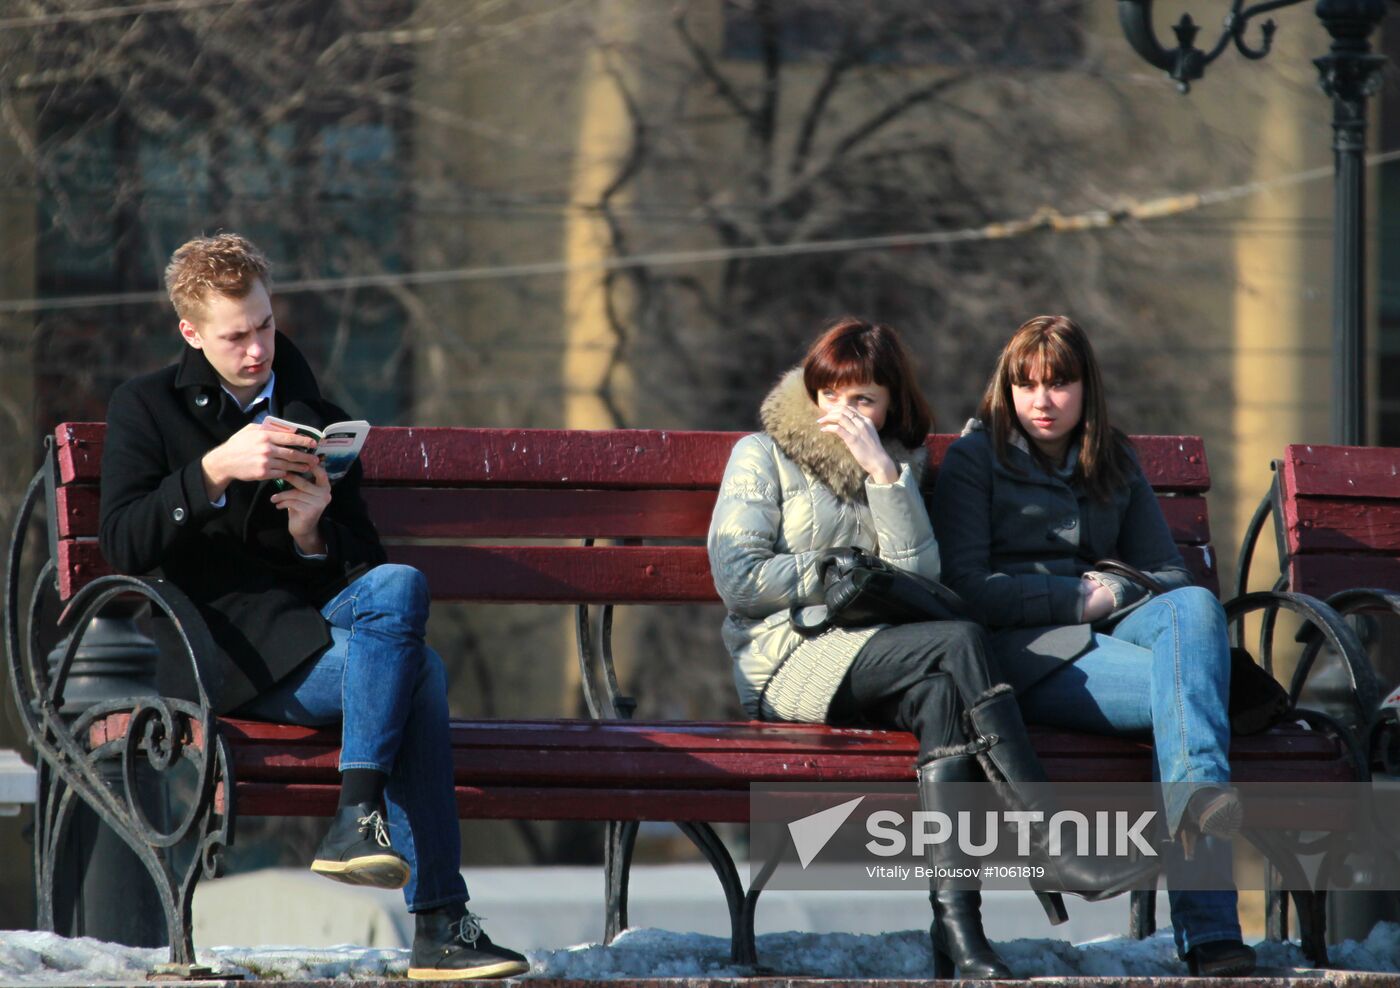 Muscovites on leisure time at Manezh Square